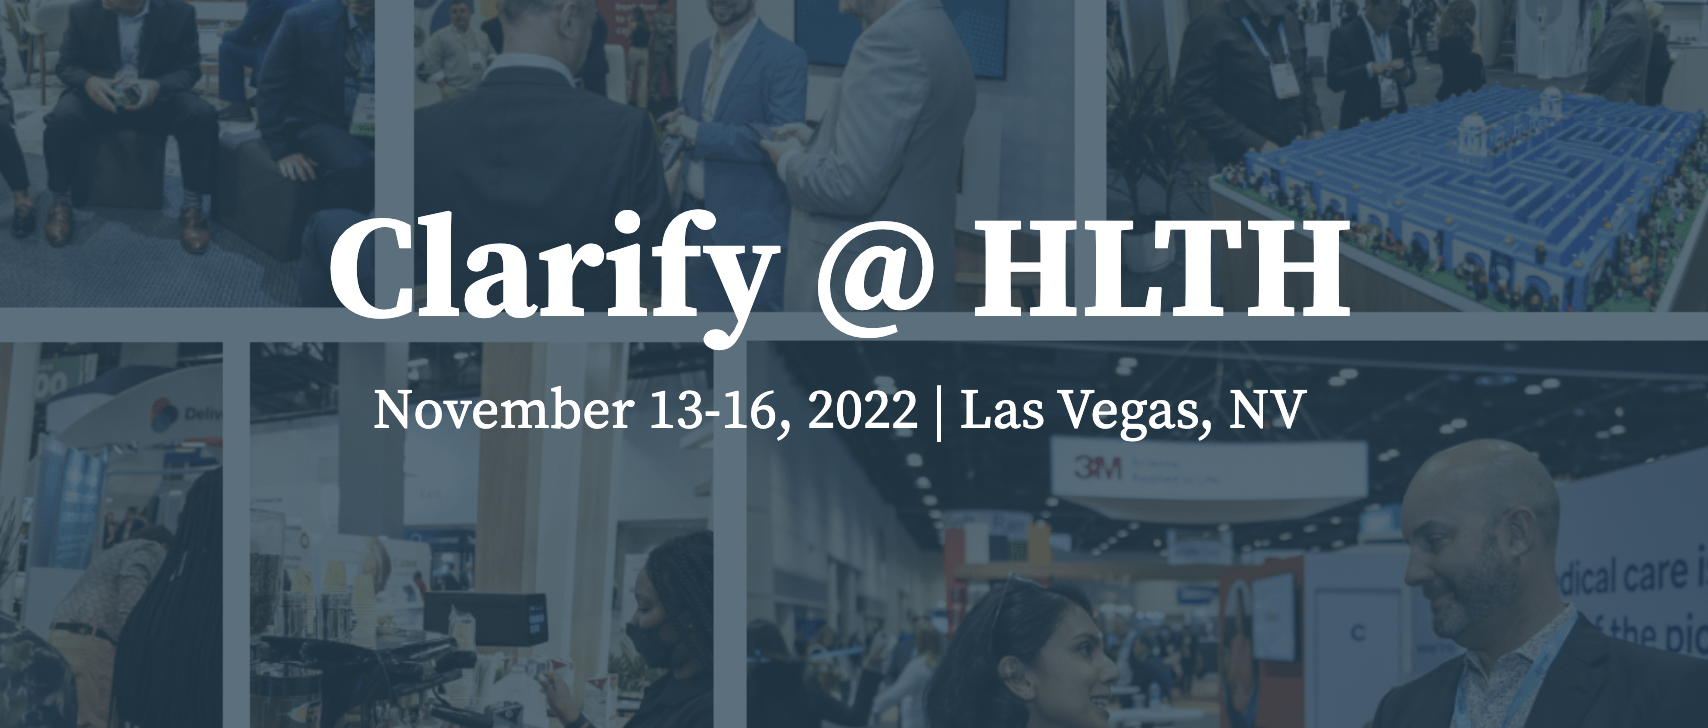 Find Clarify at HLTH 2022 in Las Vegas